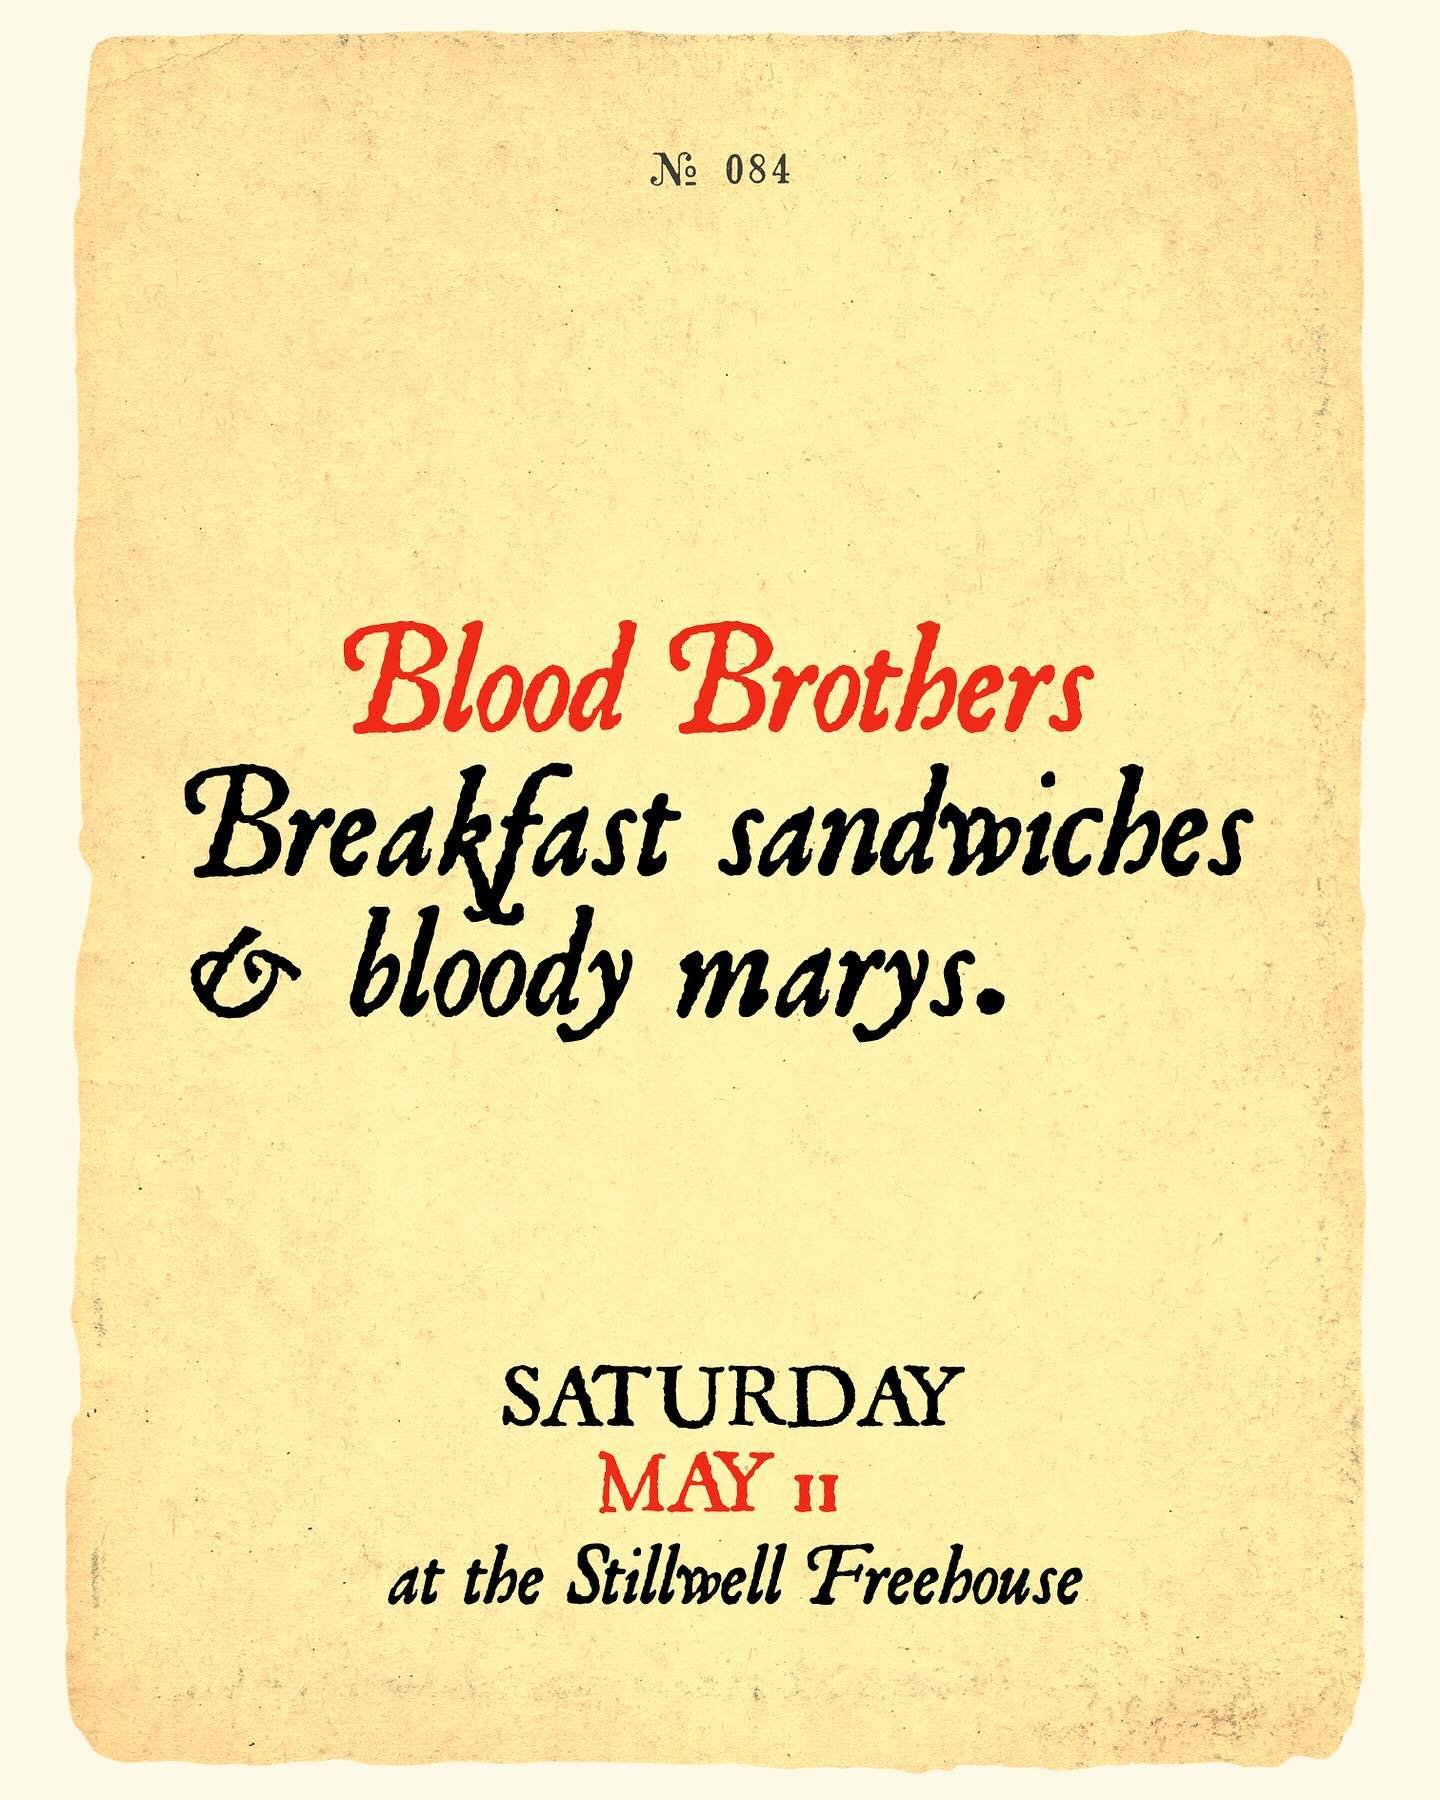 A bloodthirsty brunch! 👹🍻

10 taps from the incredible @bloodbrothersbrewing ✋🏻

Breakfast sammies to stay or take away from @meatwalllet &amp; co 🍳

Bloody Marys to seal the deal 🔒

Save the date friends! 💫

@opencityhfx 
@nebahfx 
@halifaxnoi